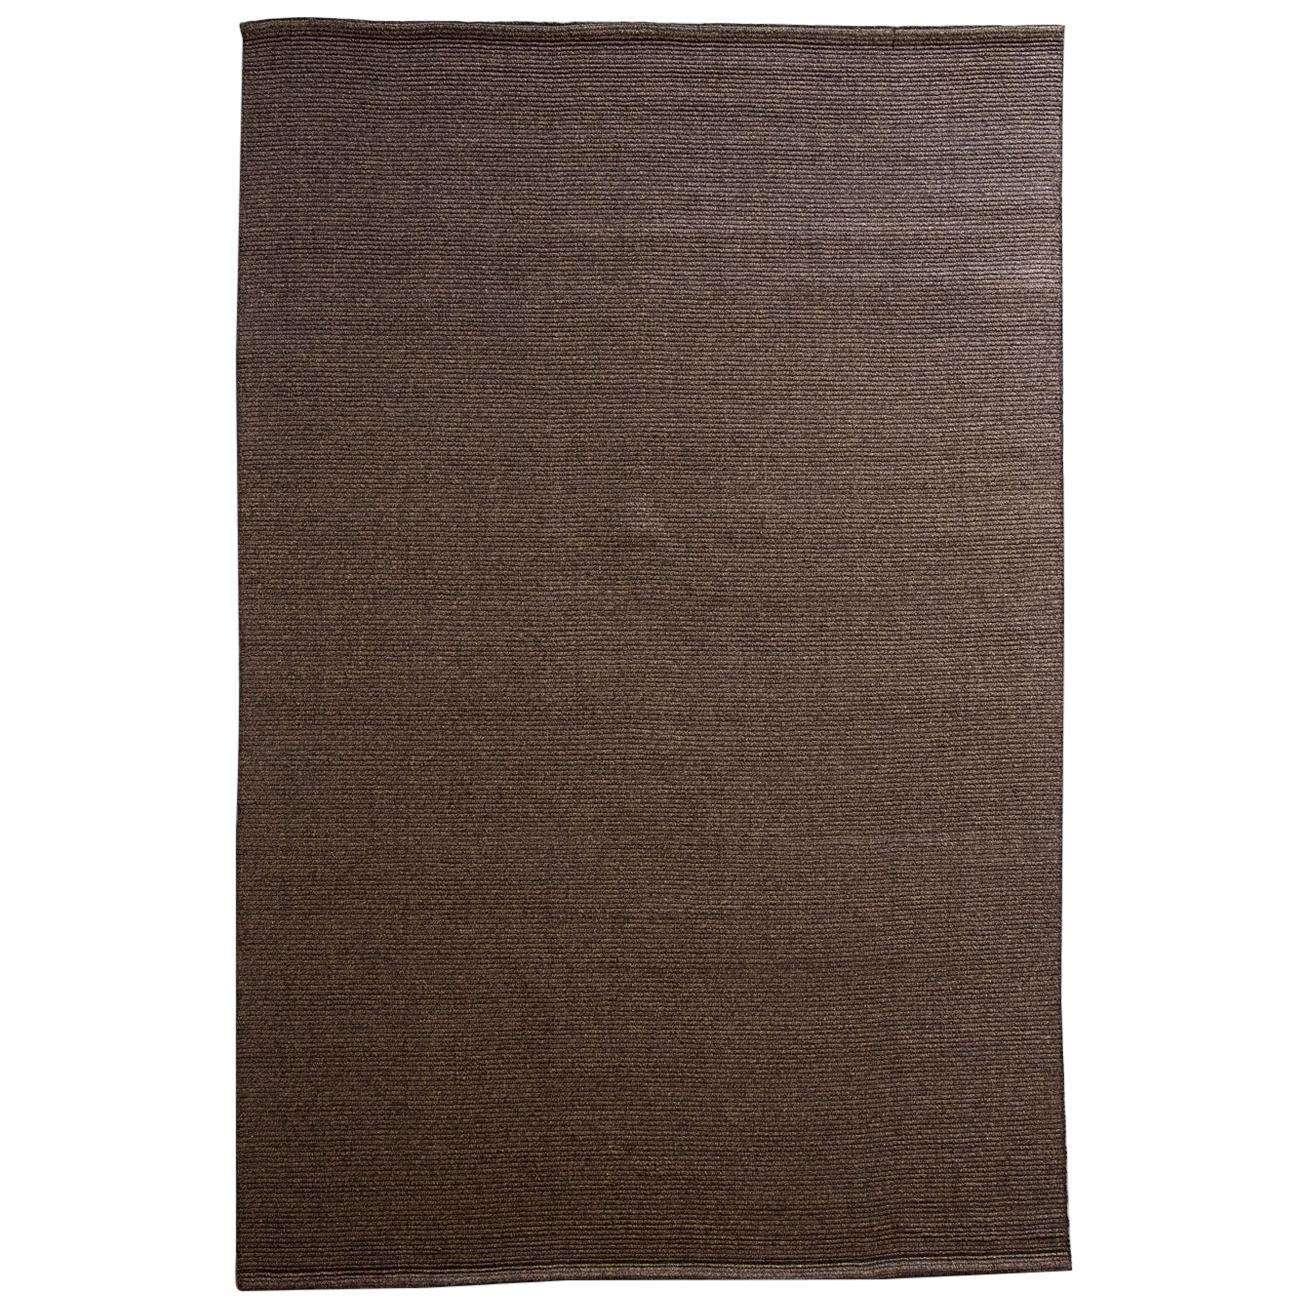 Contemporary Resistant Indoor-Outdoor Brown Rug by Deanna Comellini 200x300 cm